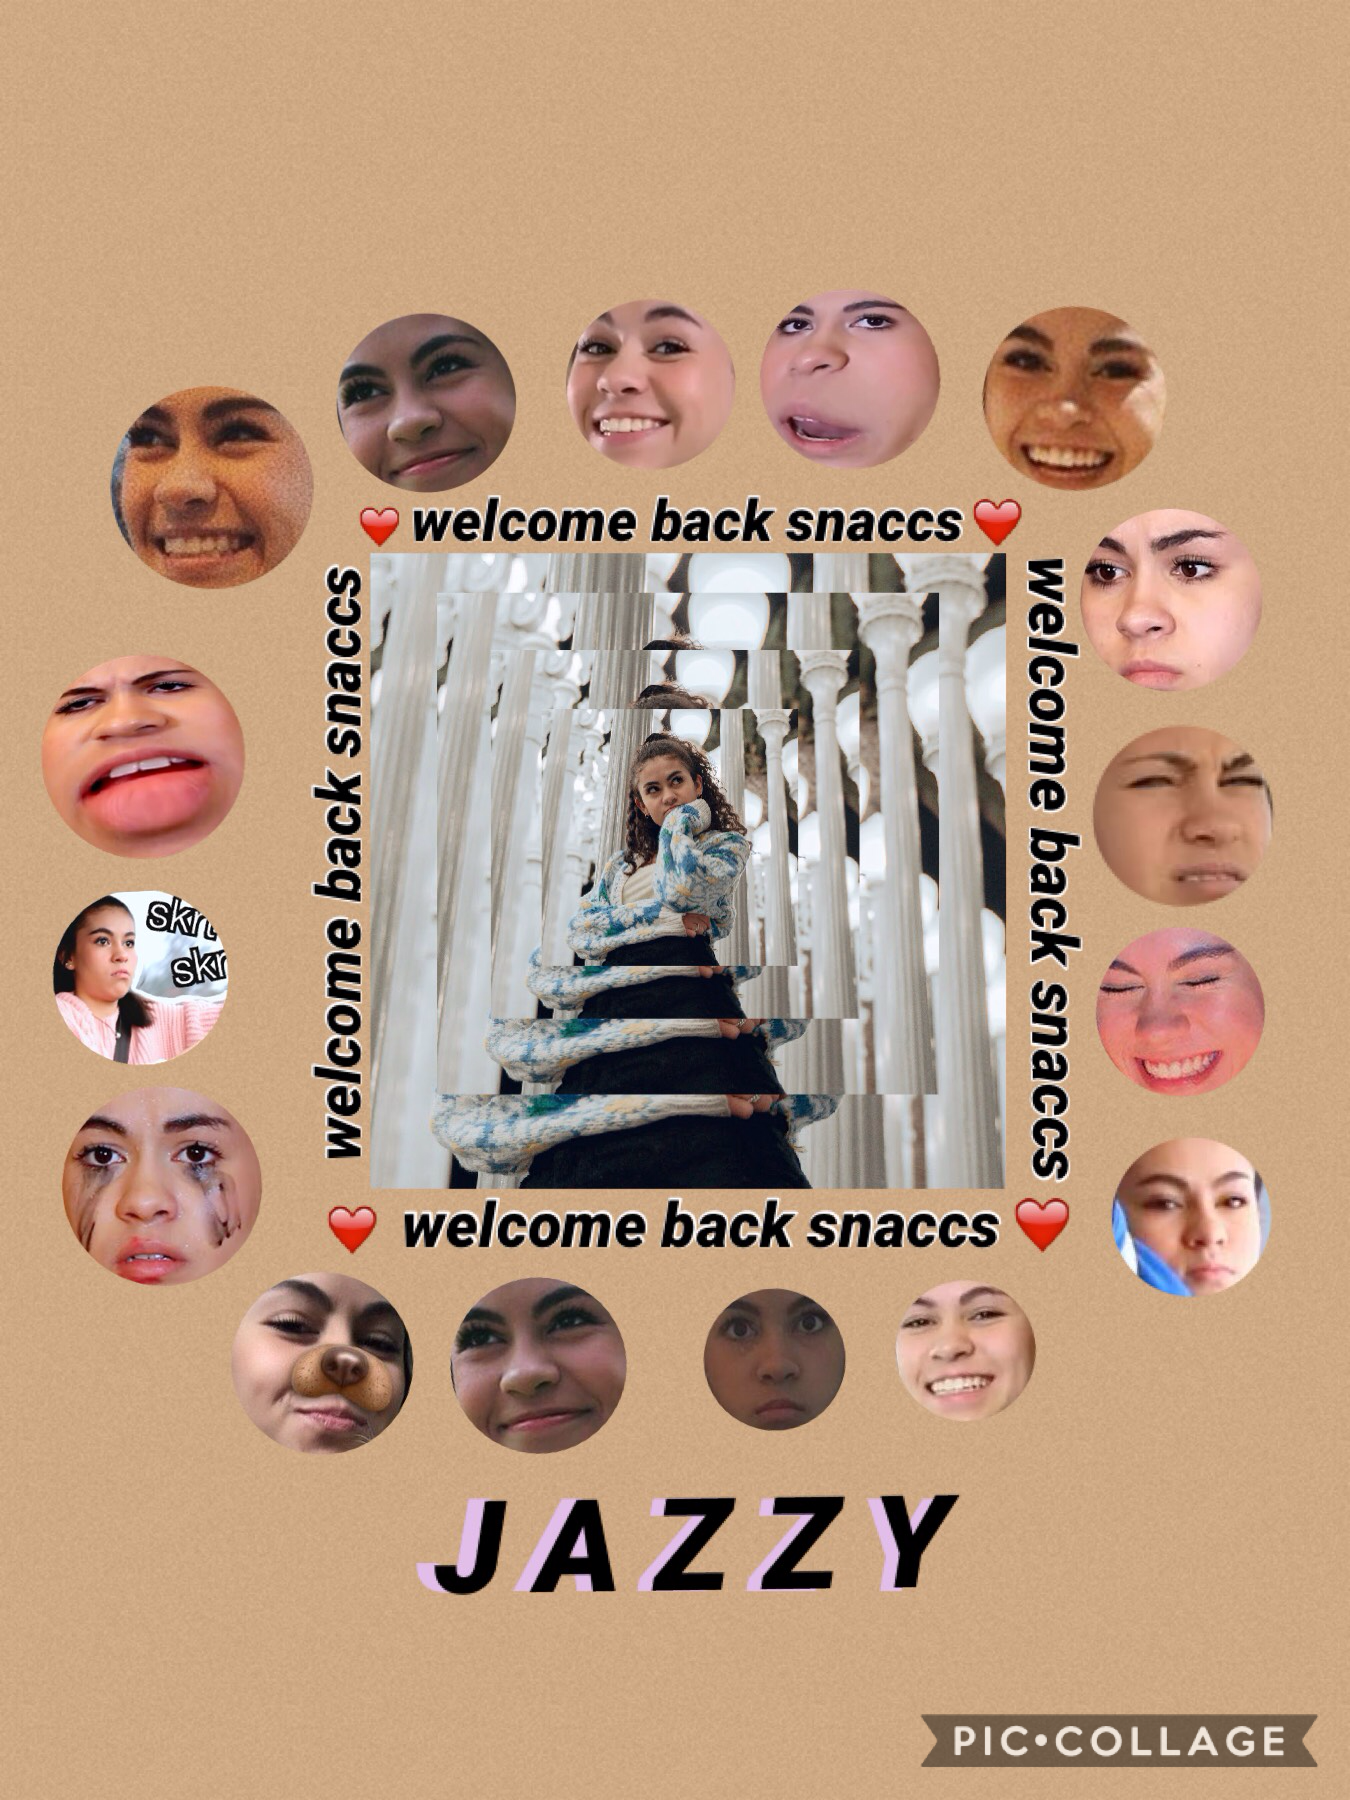 jazzy if you see this just wanna let you know ilysmm❤️